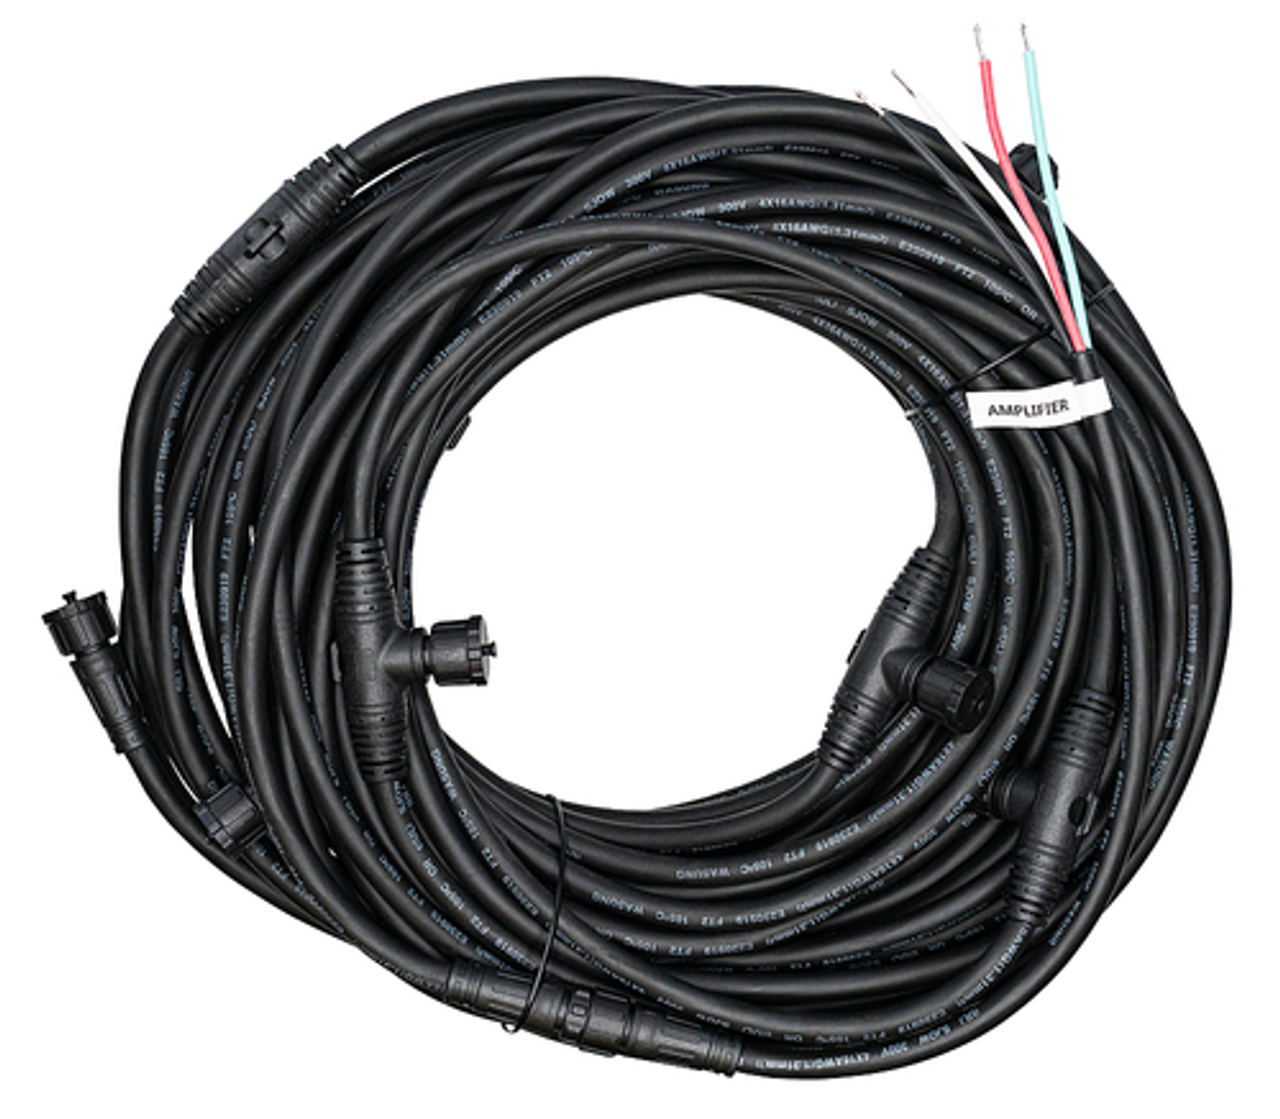 8+2 OUTDOOR WIRING HARNESS for select Sonance Landscape Style Systems (Each) - Black